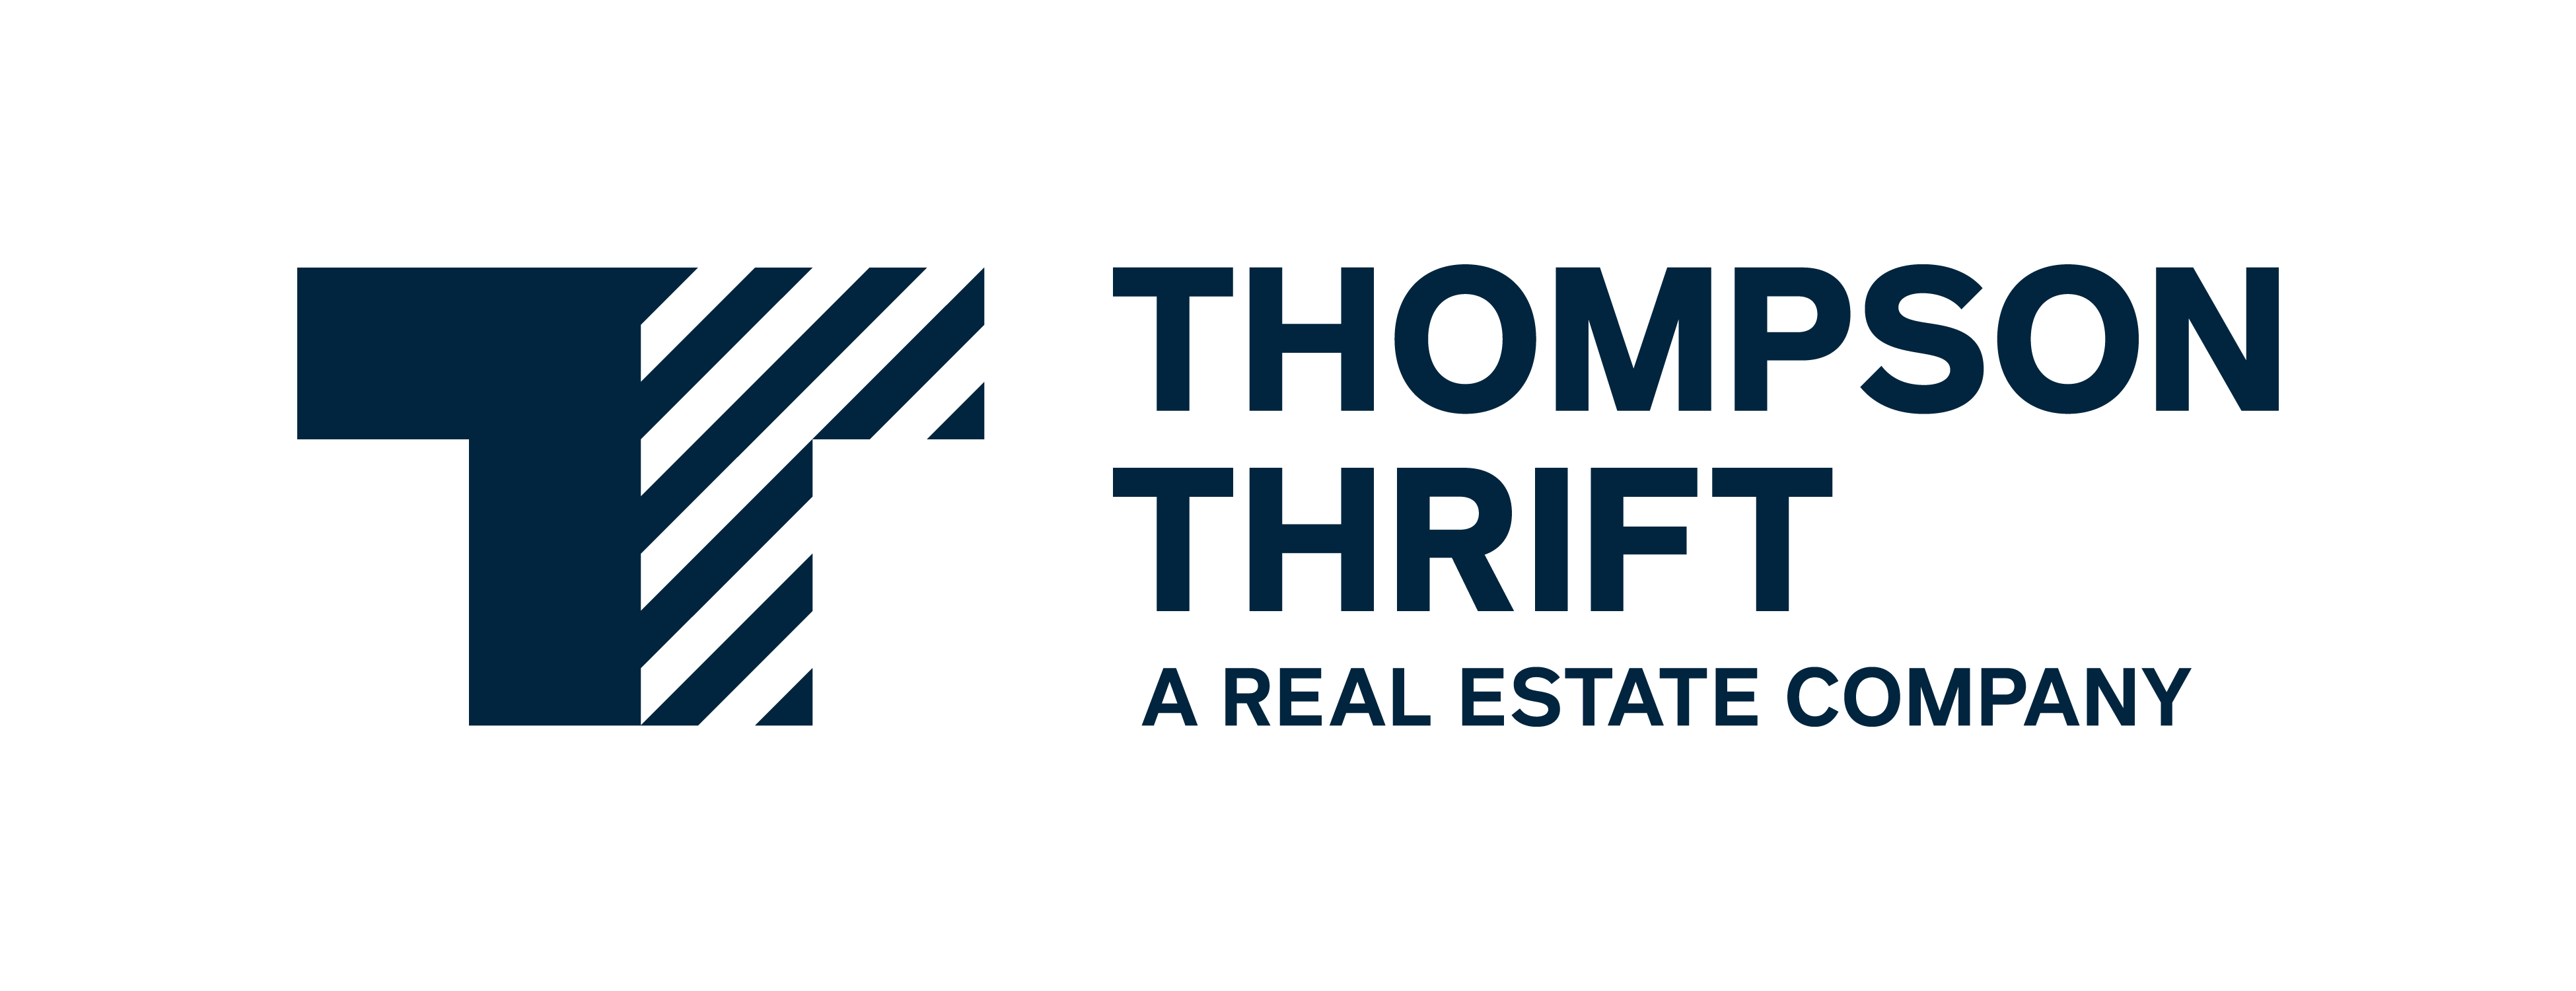 Thompson Thrift, A Real Estate Company